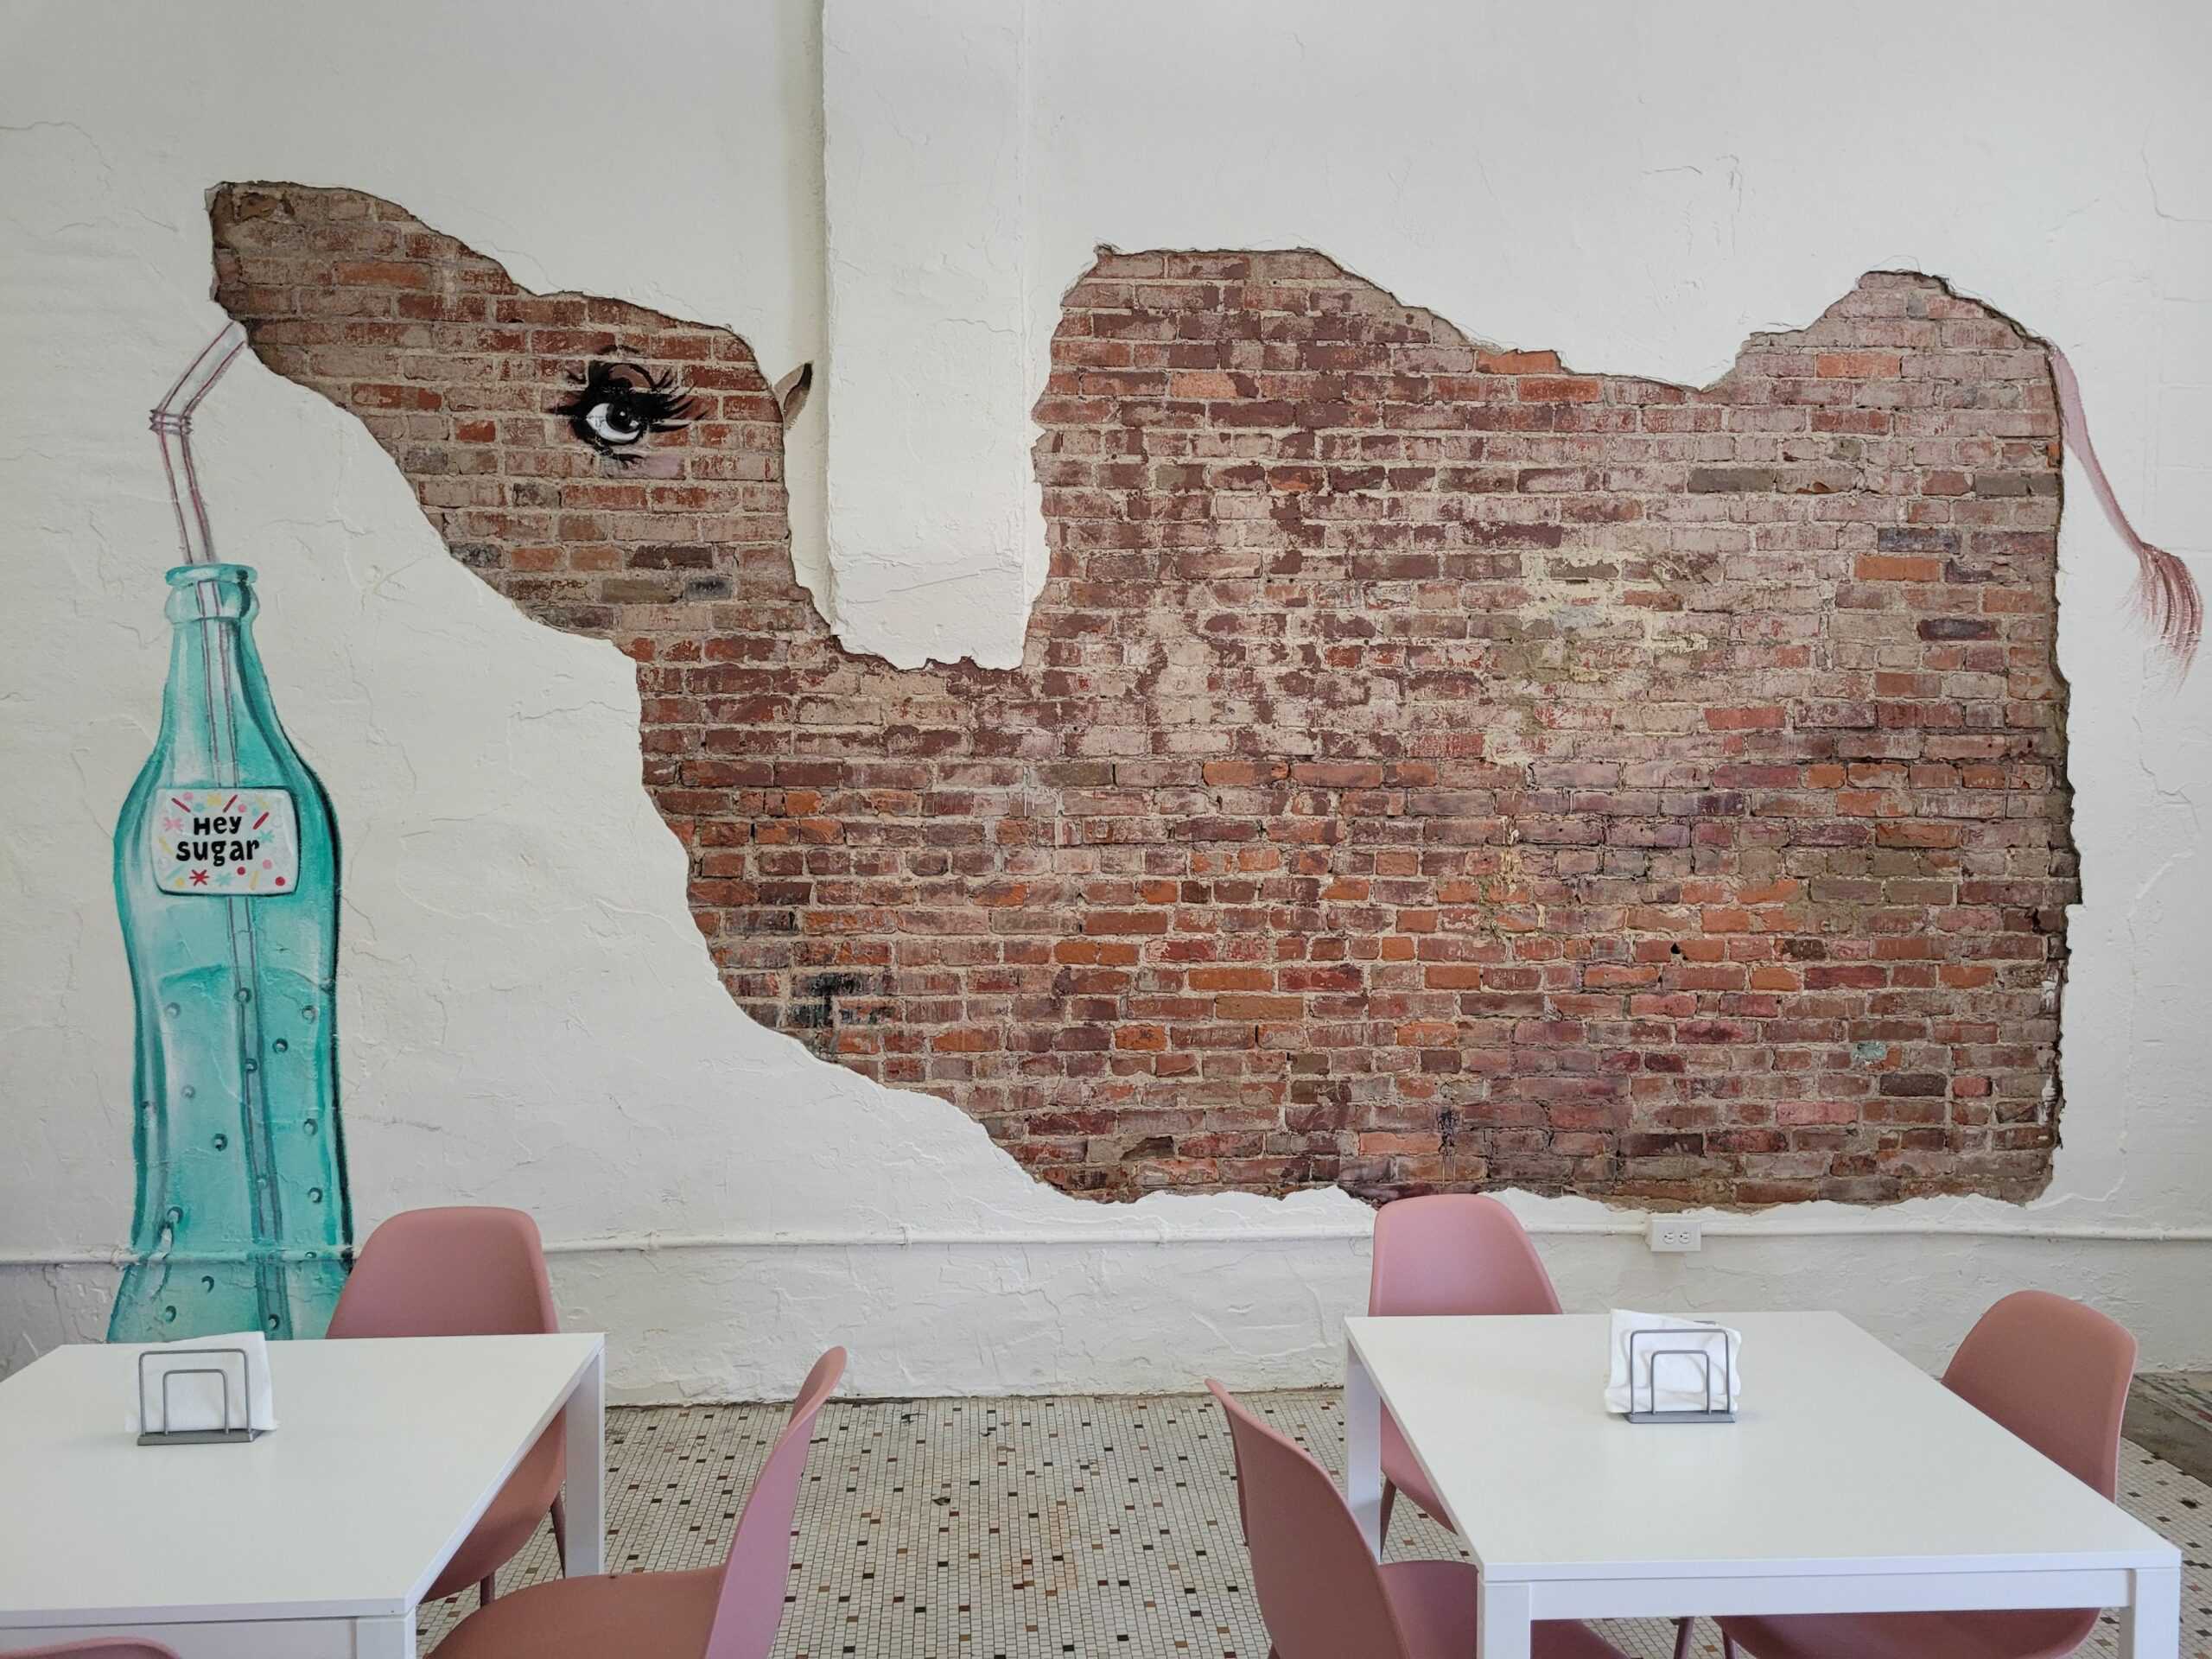 A camel made out of exposed brick and paint on the wall of Hey Sugar.